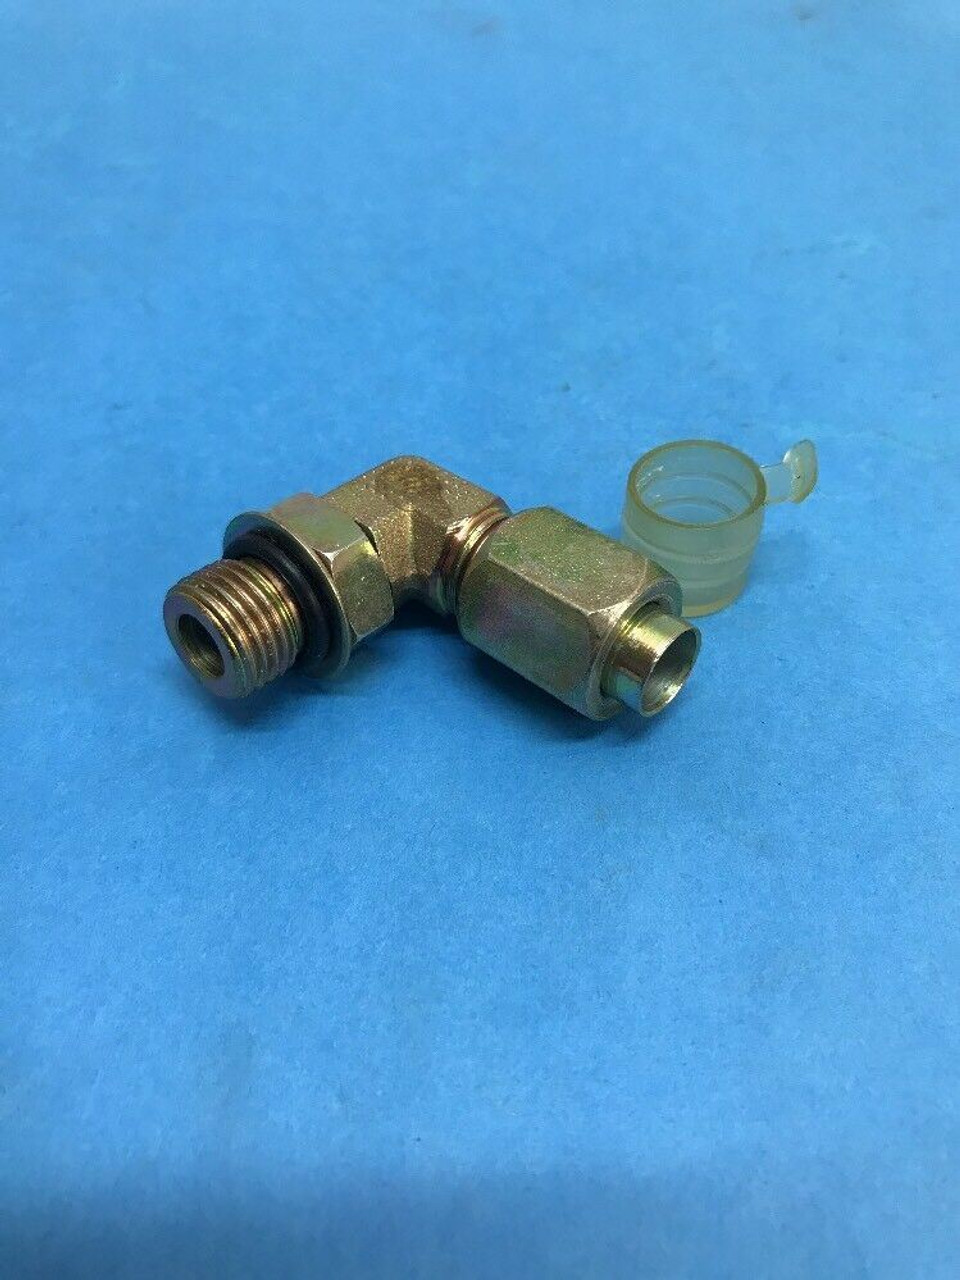 Tube to Boss Elbow MS51527A6Z 3/8” OD Tube 5/16" Thread